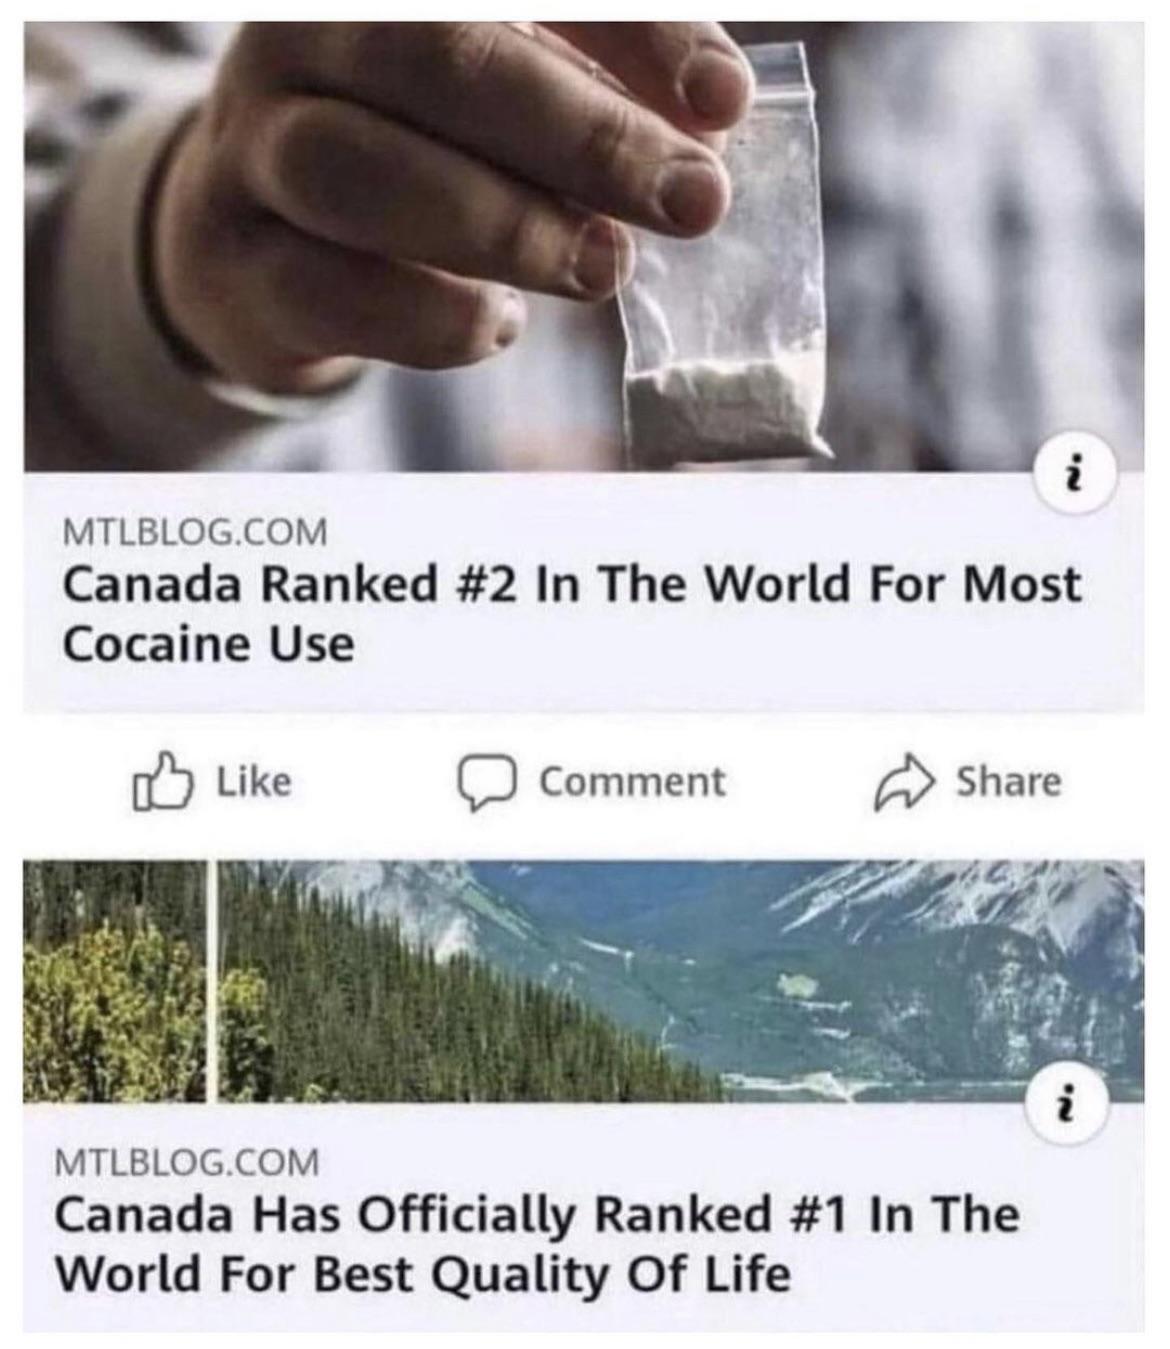 funny pictures - canada ranked #1 for quality of life meme - In i Mtlblog.Com Canada Ranked In The World For Most Cocaine Use Comment i Mtlblog.Com Canada Has Officially Ranked In The World For Best Quality Of Life